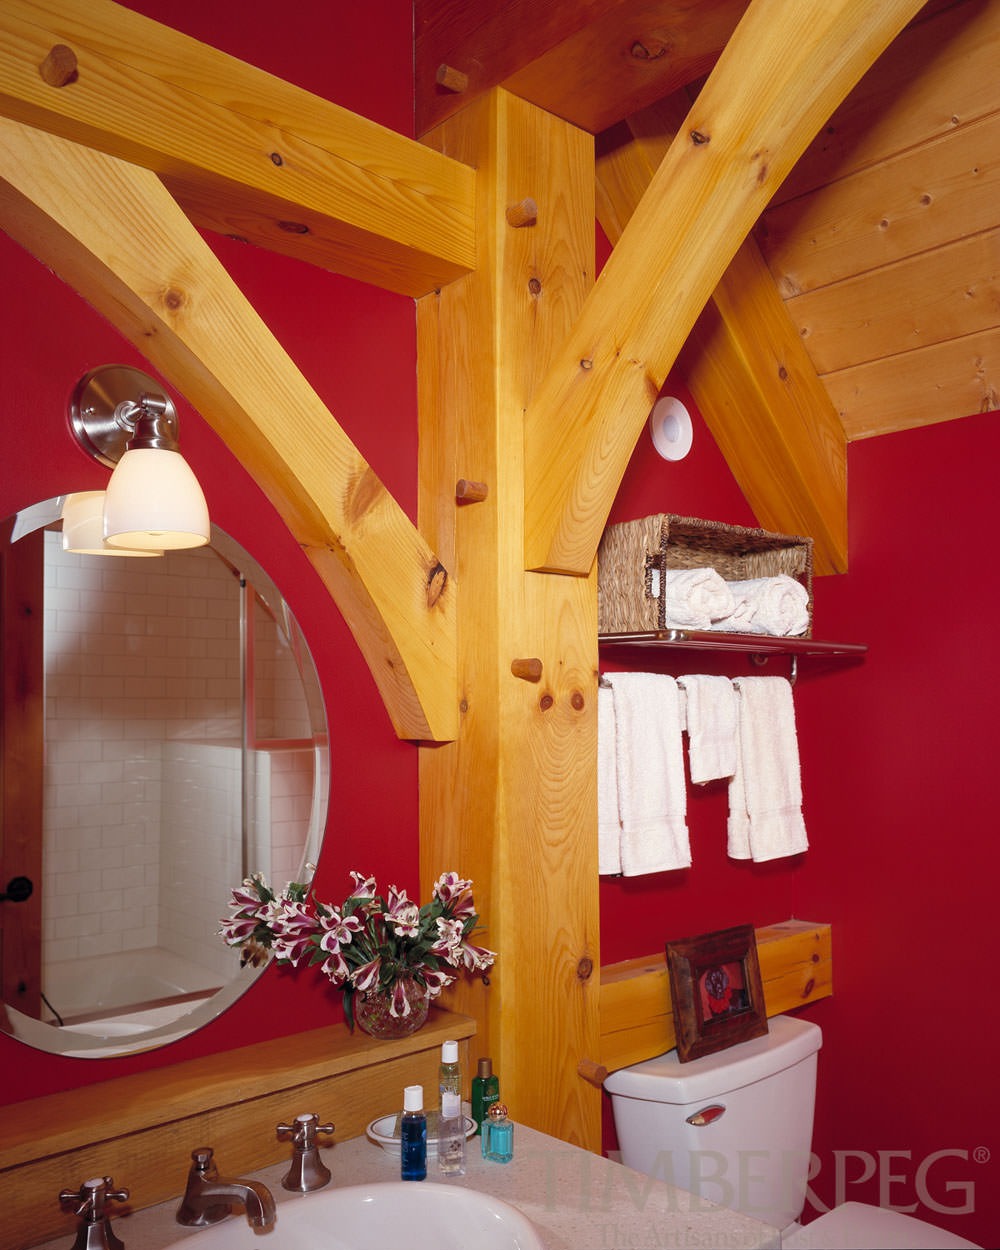 The Winhall Vermont (5969) bathroom with timber framing